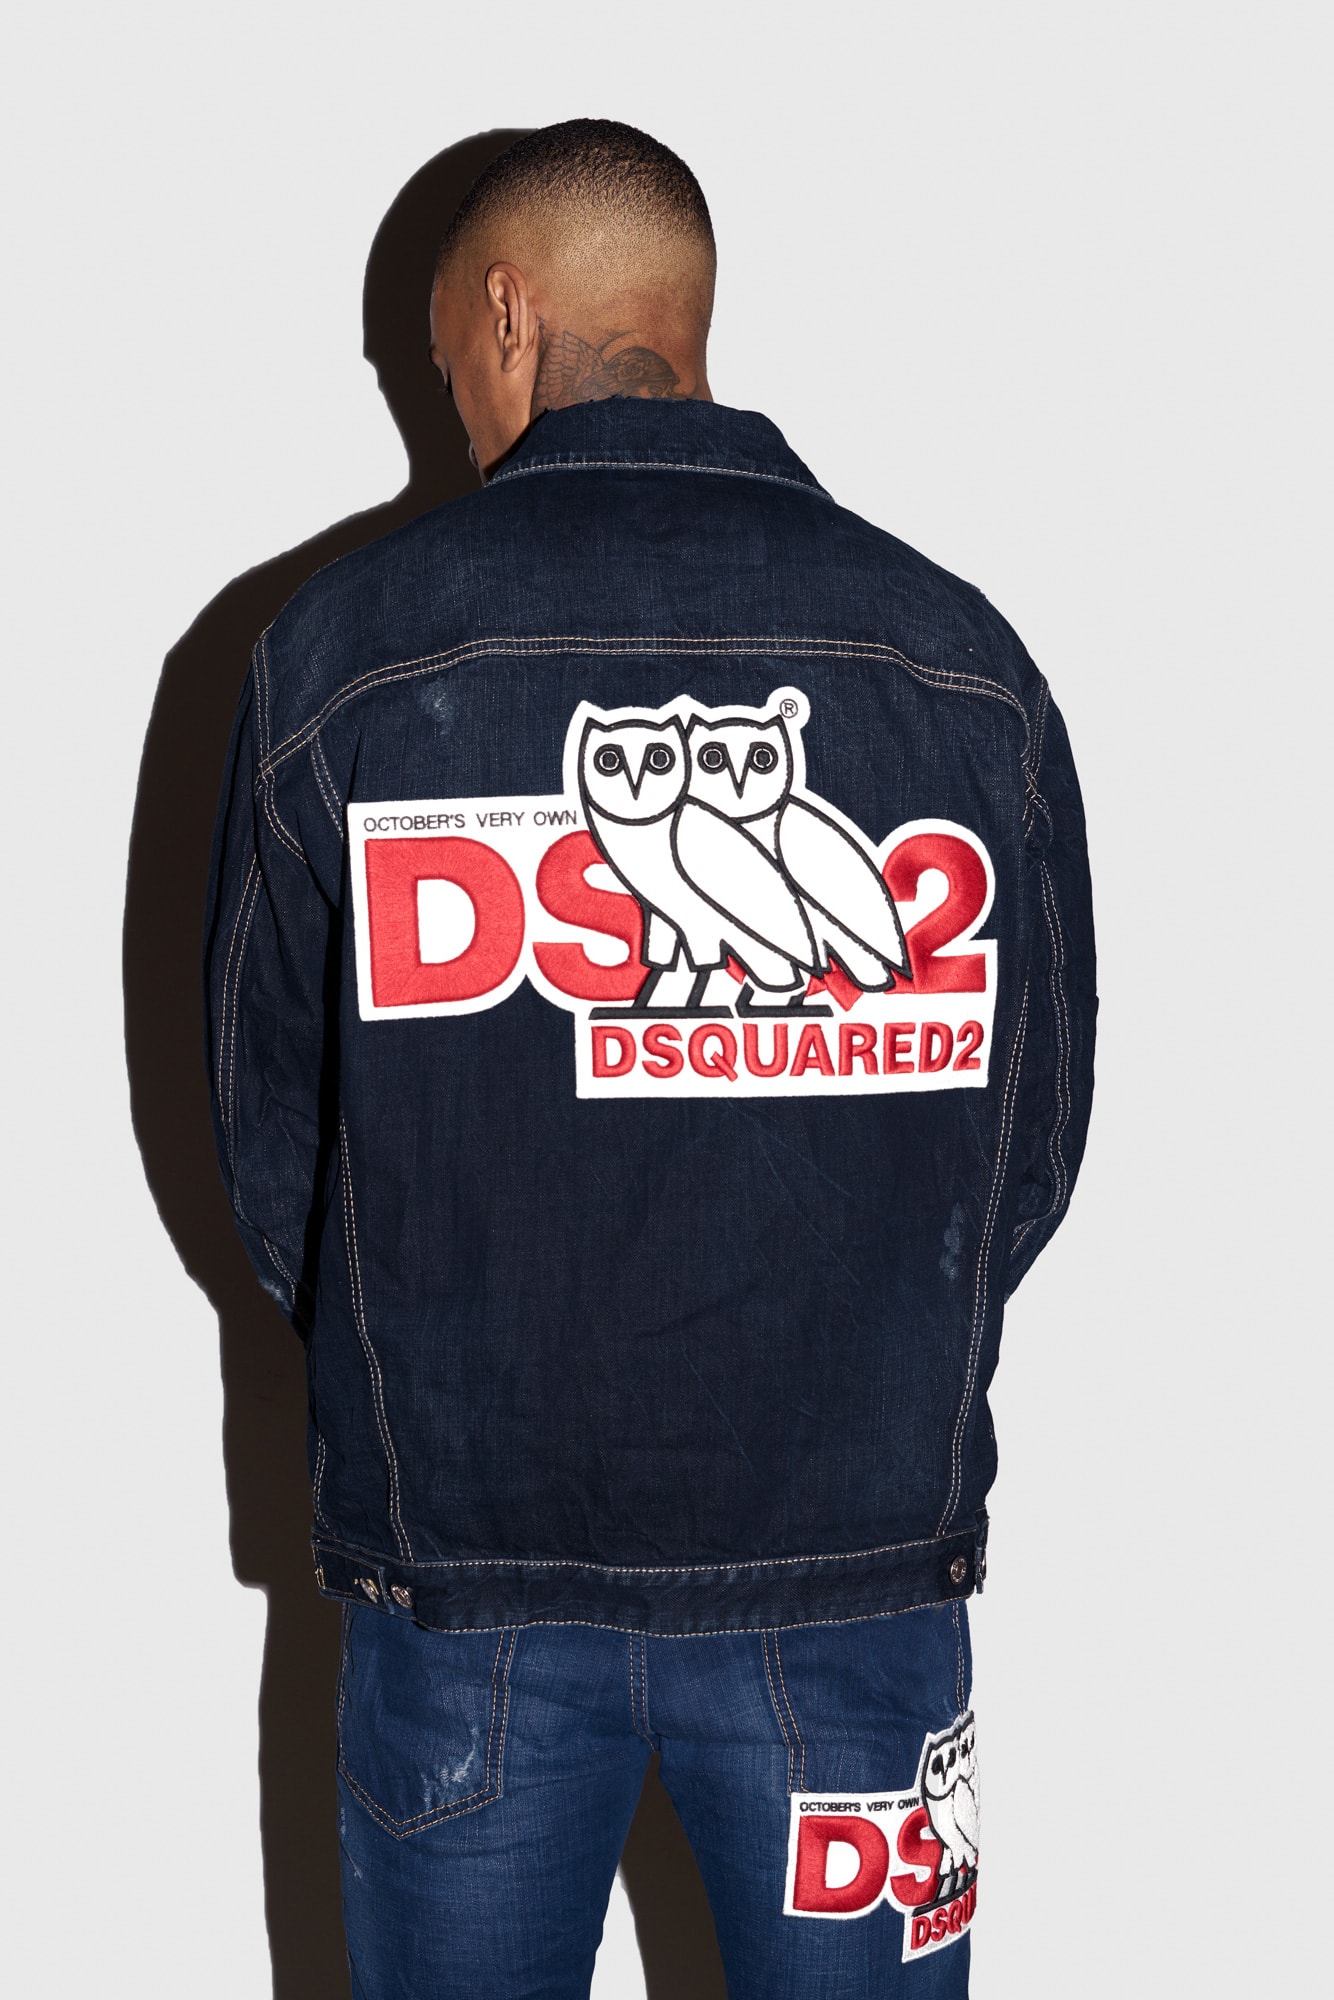 OVO x Dsquared2 SS19 Collaboration spring summer October's very own drake canada owl logo